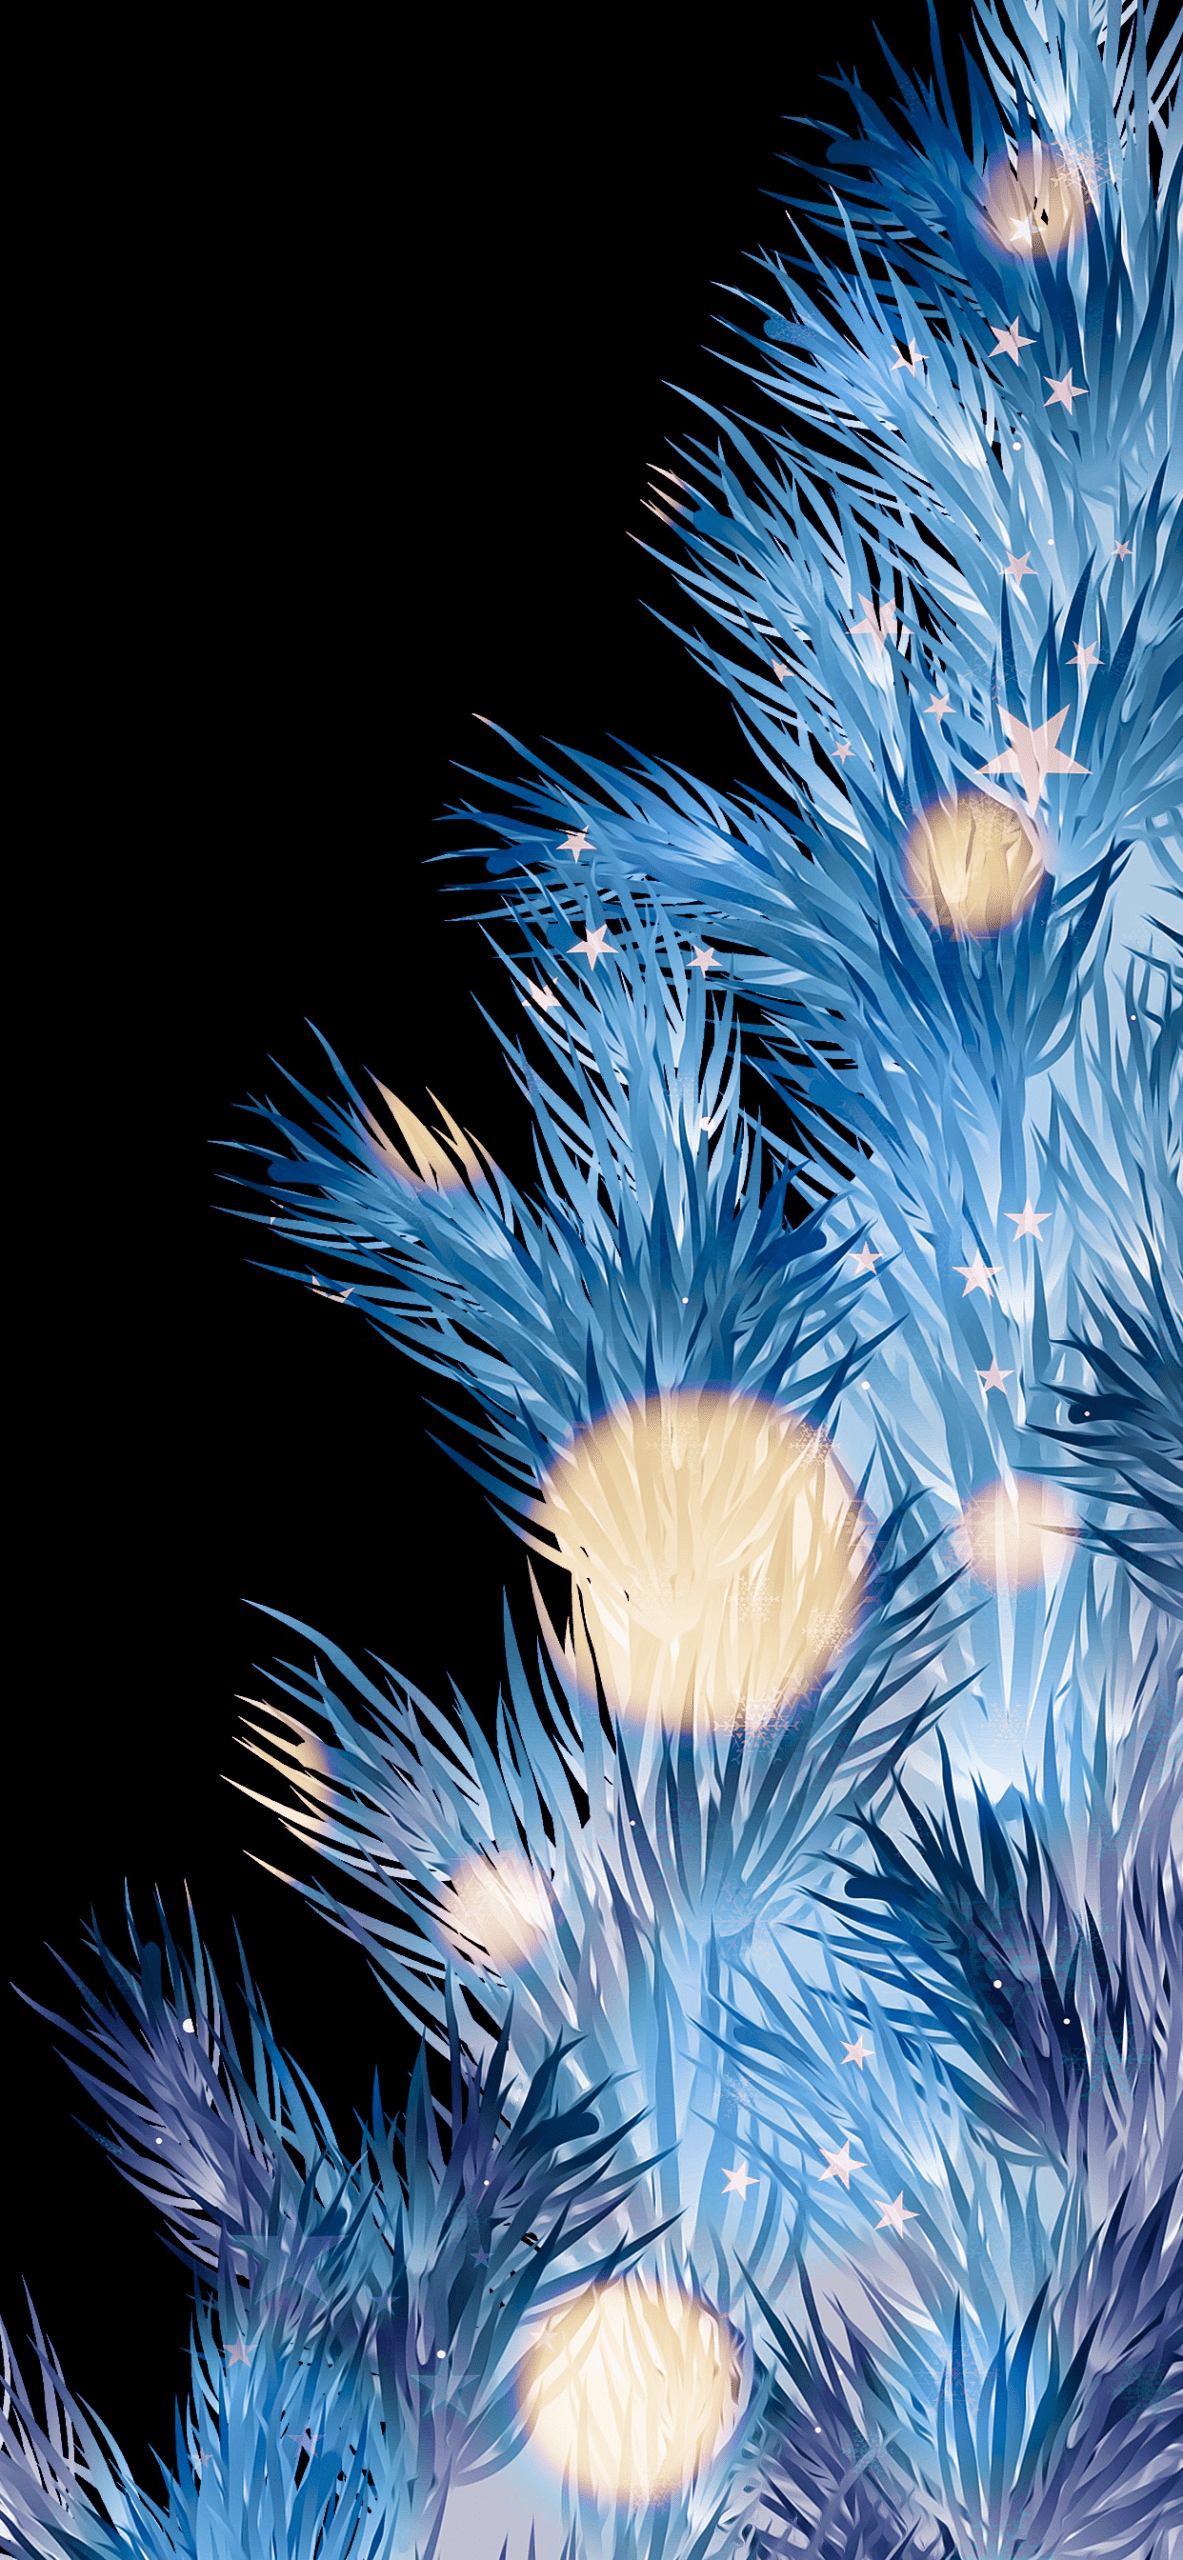 A blue pine tree branch with lights on a black background - White Christmas